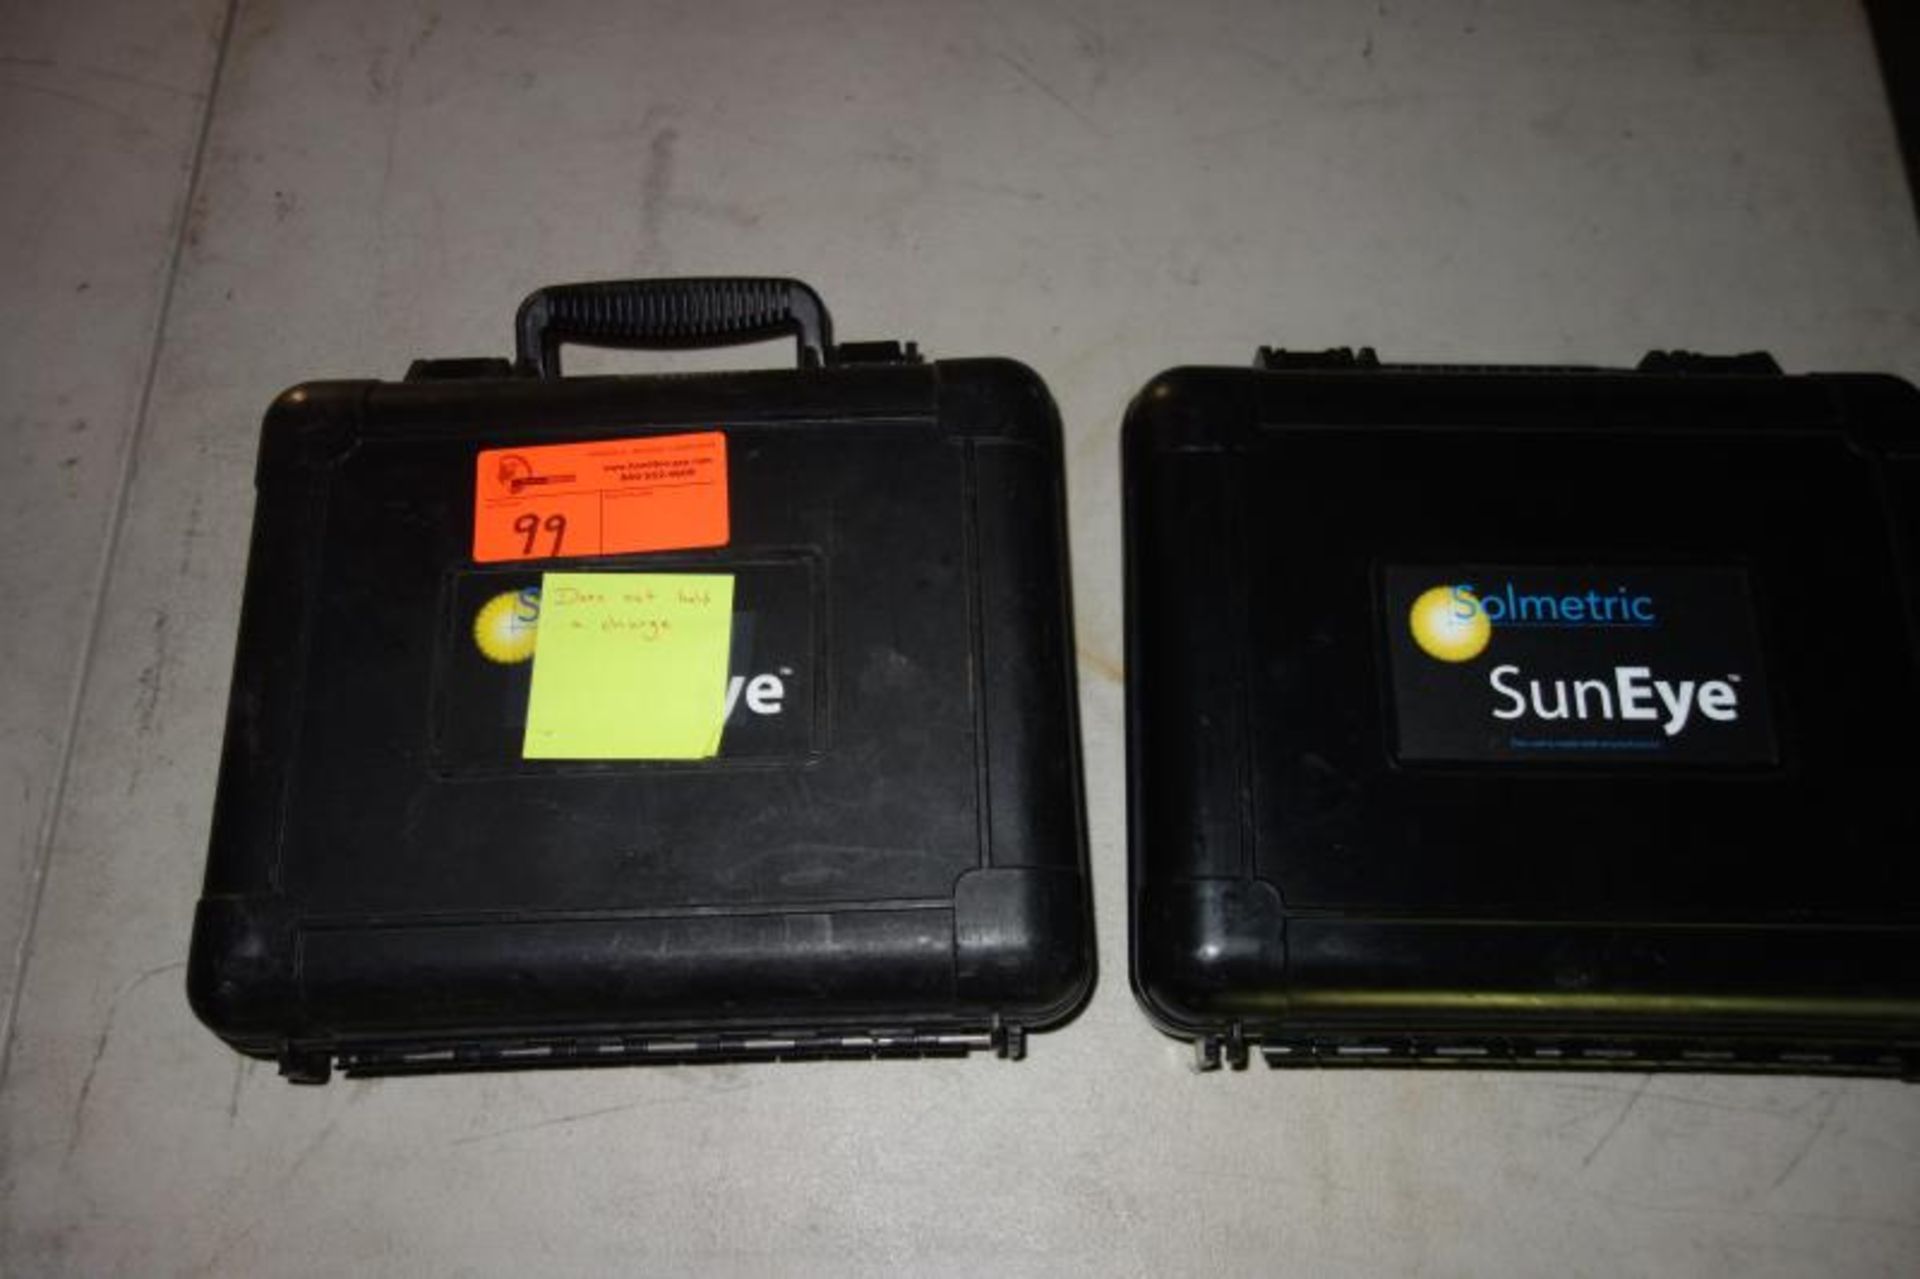 (2) Case w/ Solmetric Suneye 210 -Untested - 1 for Parts - Image 5 of 6